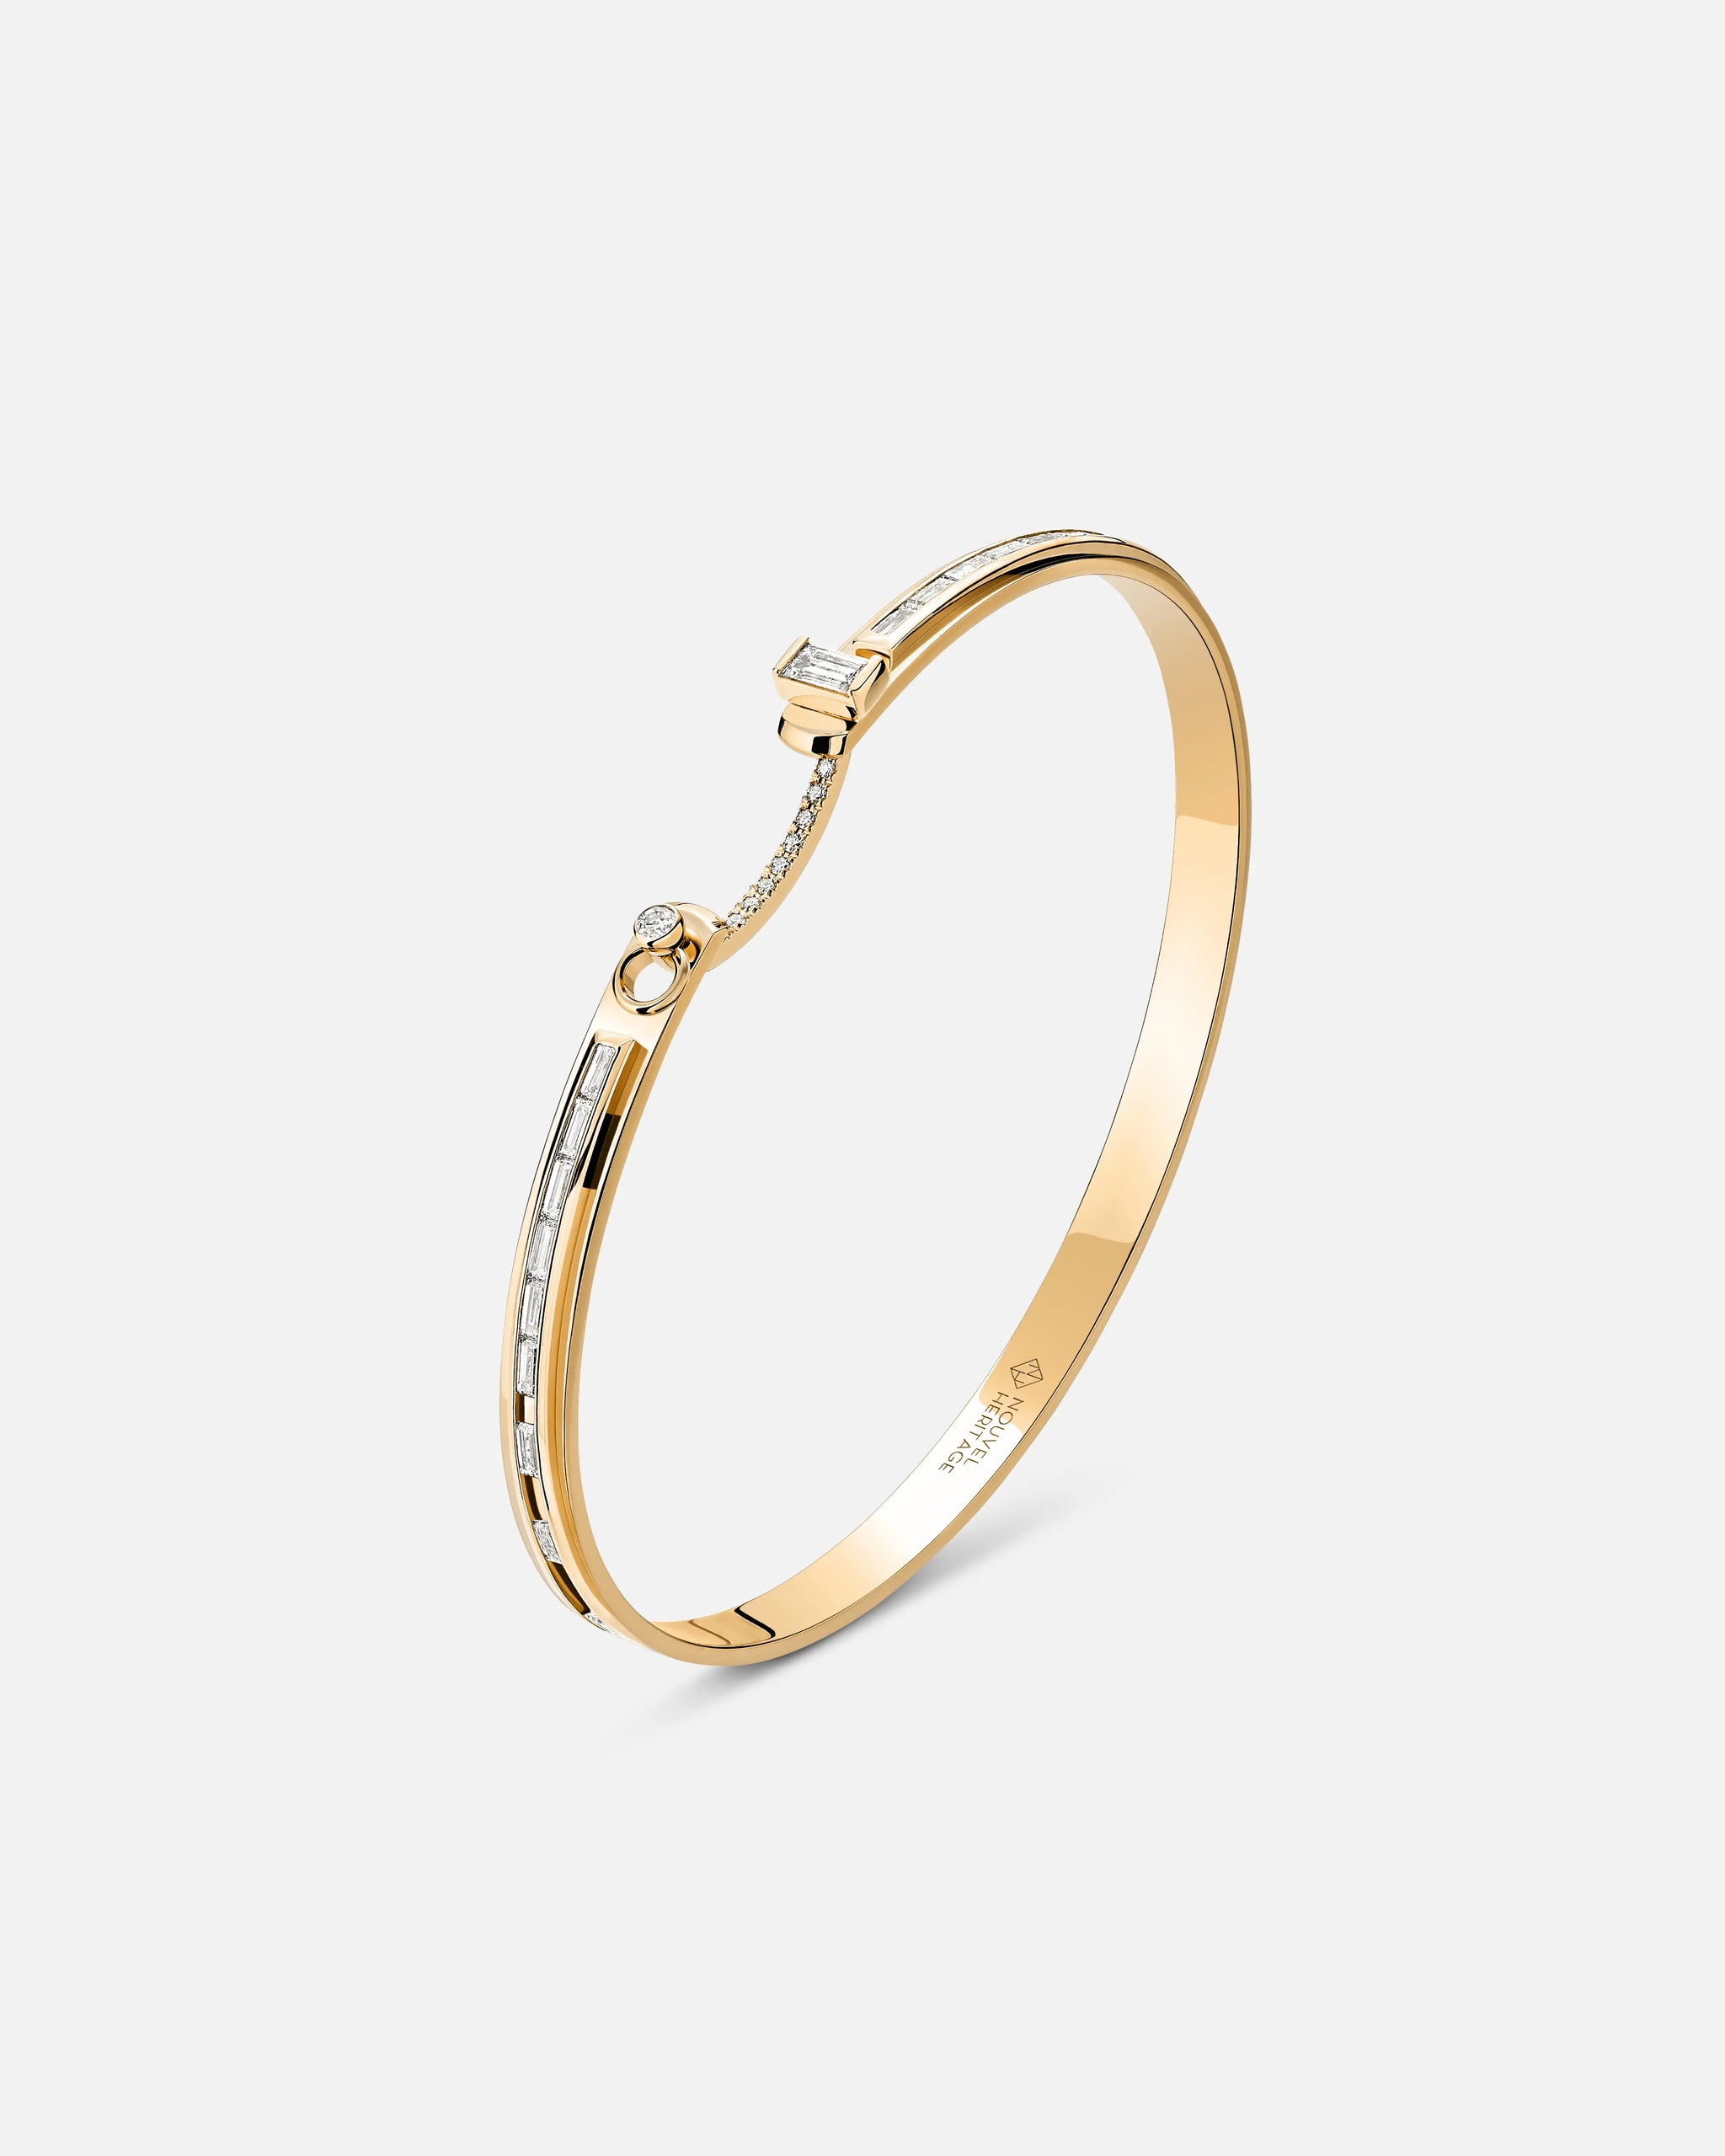 My Best Friend's Wedding Mood Bangle in Yellow Gold - 1 - Nouvel Heritage